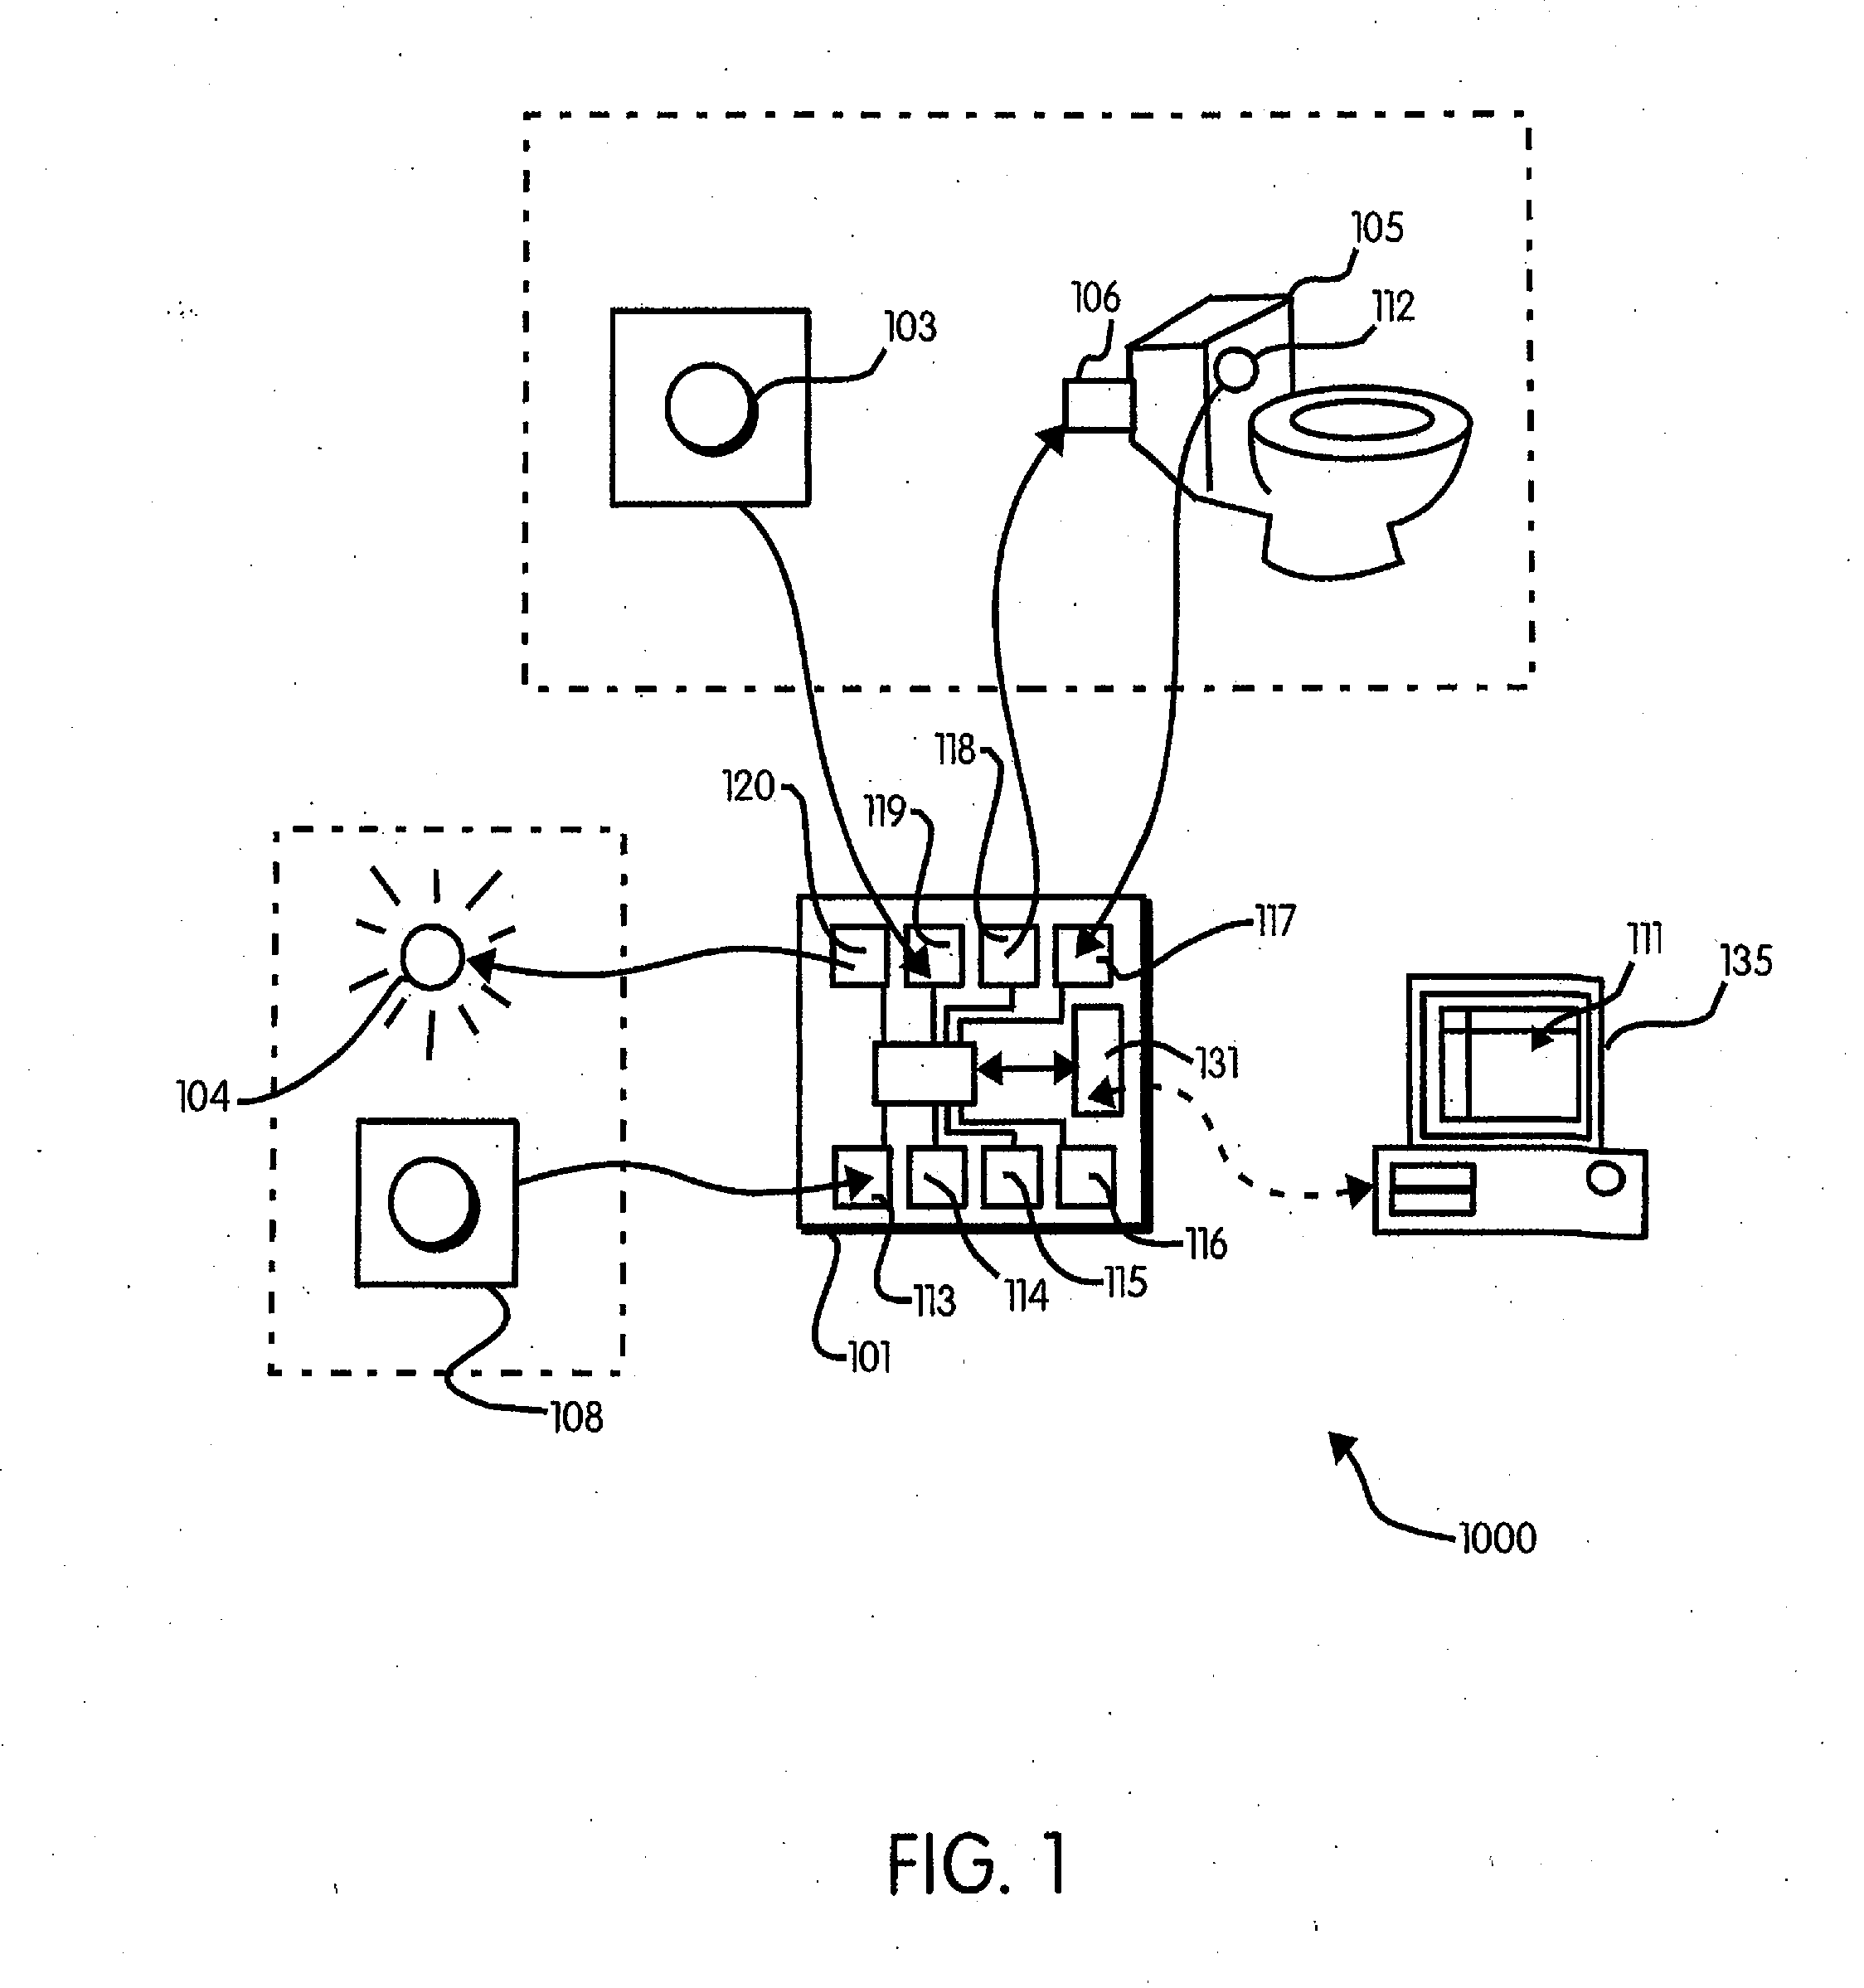 Plumbing Control System With Distress Signal